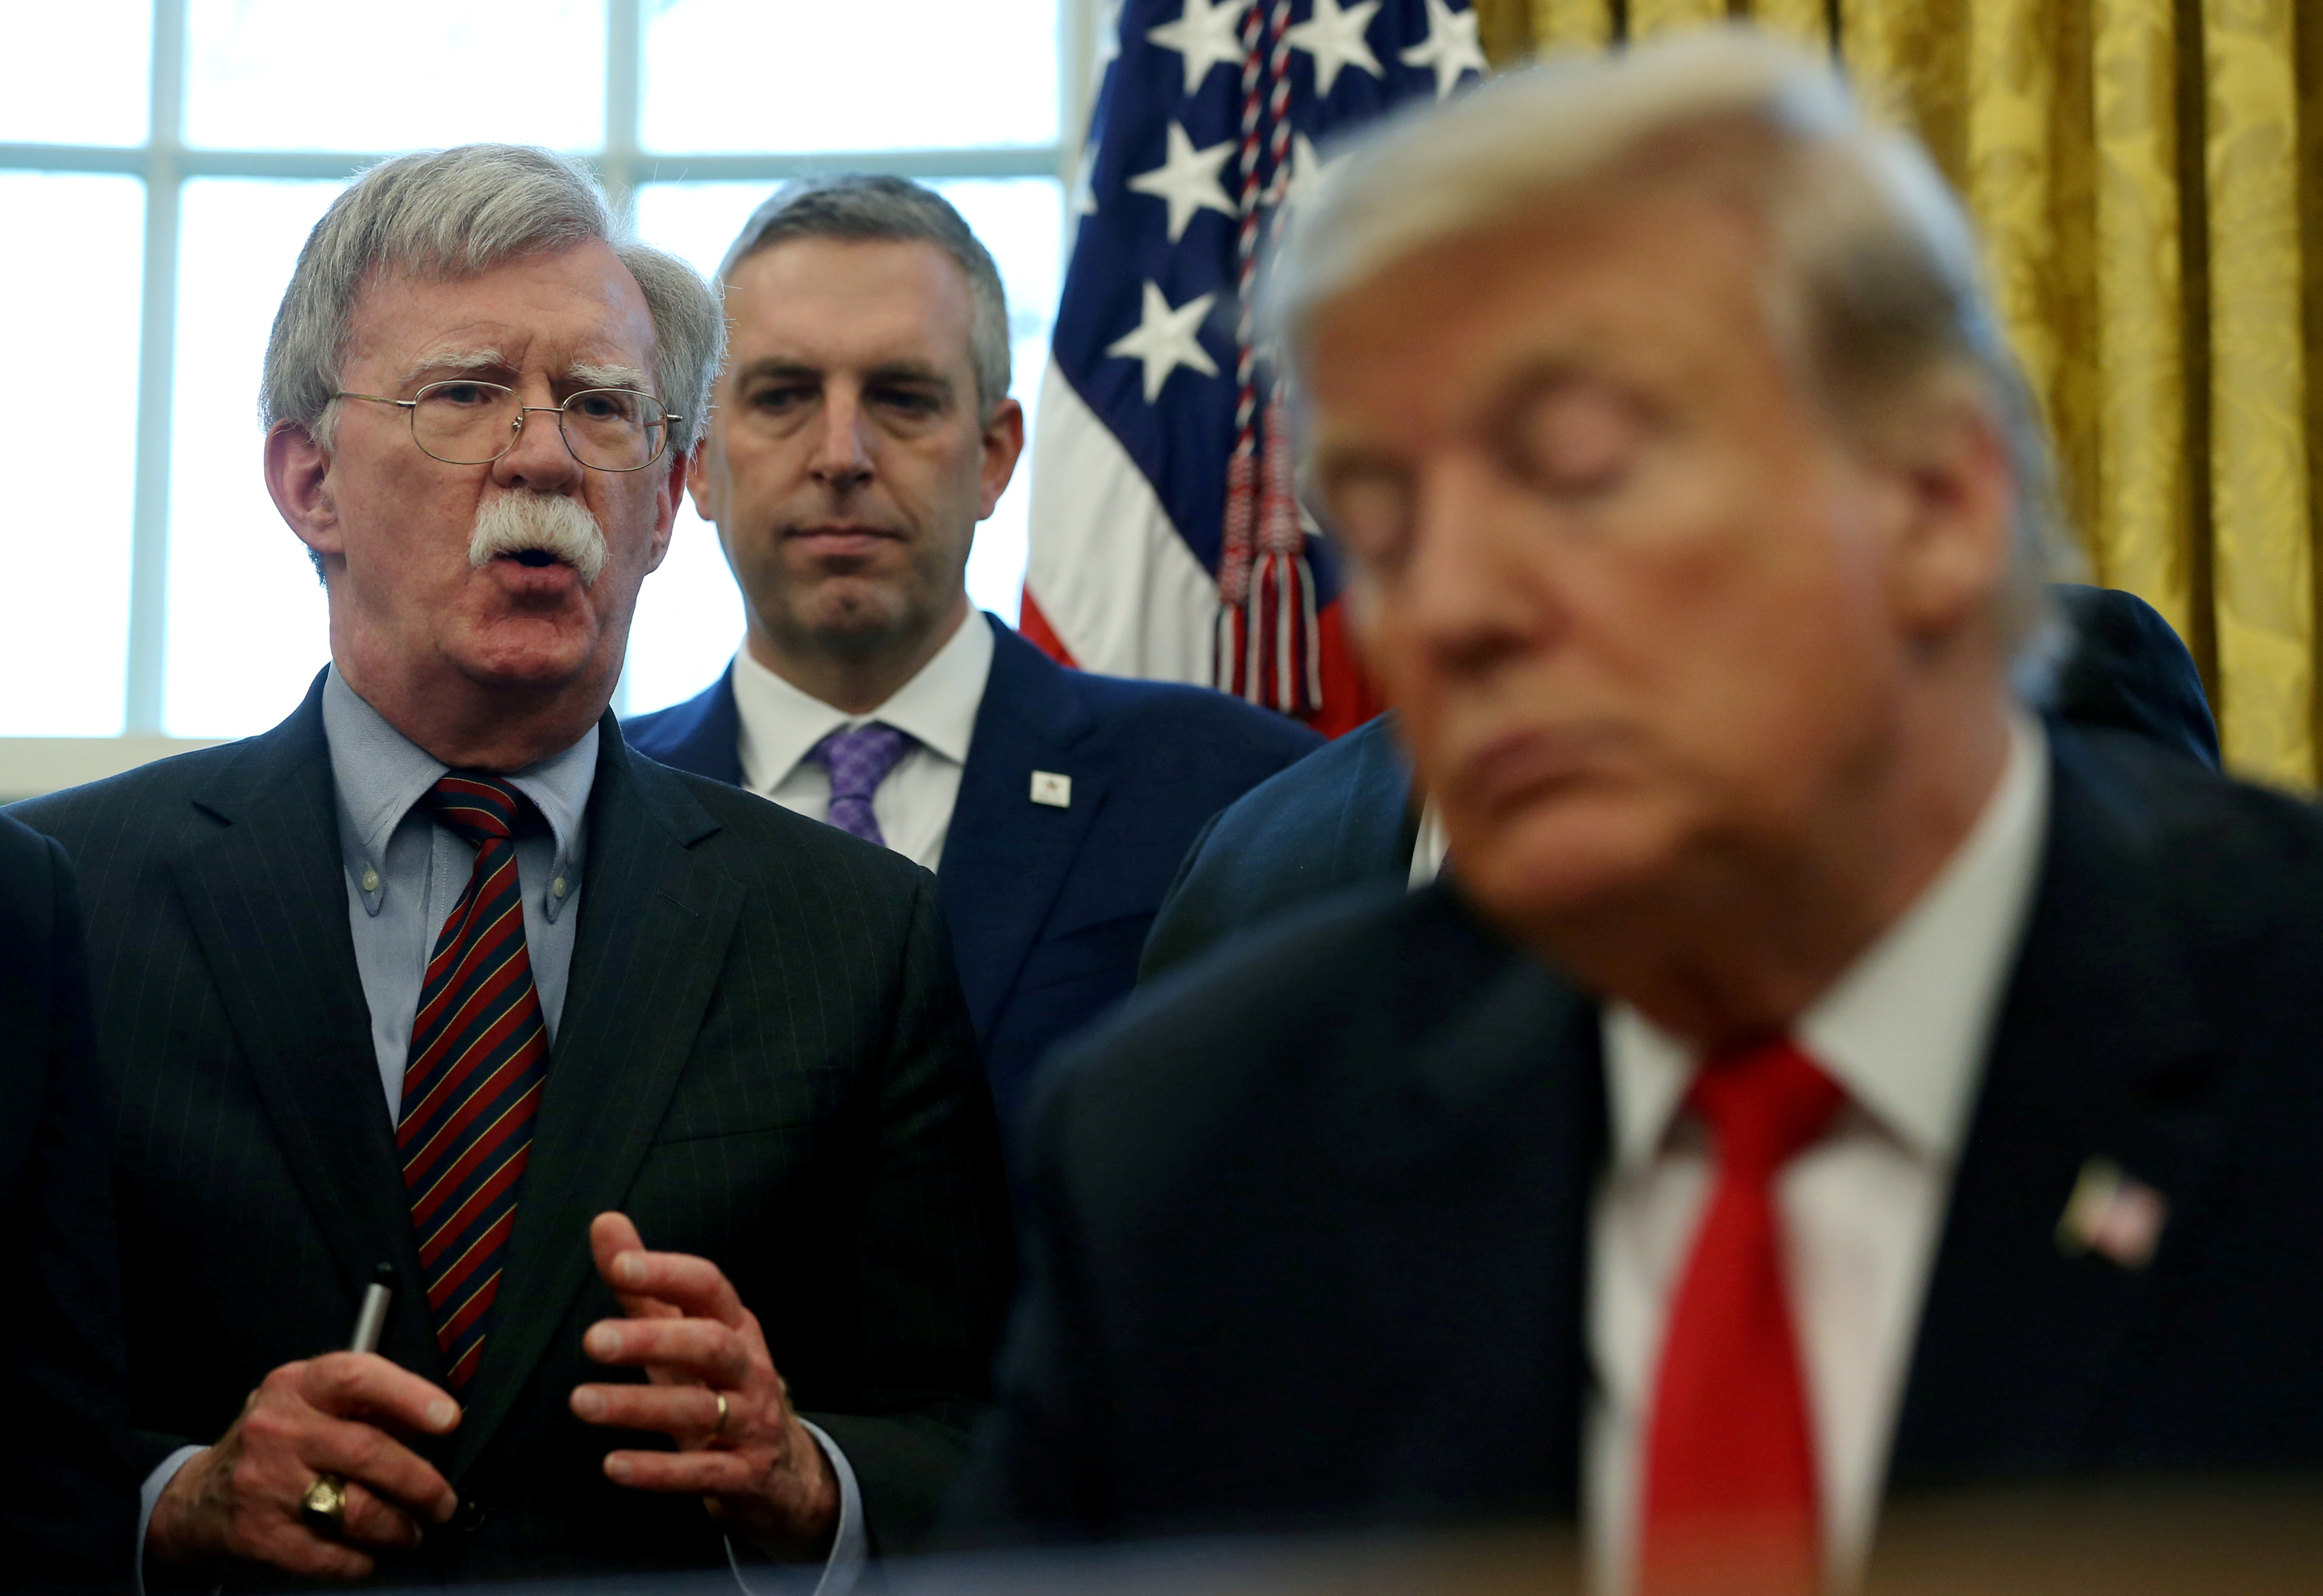 FILE PHOTO: U.S. President Donald Trump listens as his national security adviser John Bolton speaks during a presidential memorandum signing for the "Women's Global Development and Prosperity" initiative in the Oval Office at the White House in Washington, U.S., Feb. 7, 2019. REUTERS/Leah Millis/File Photo